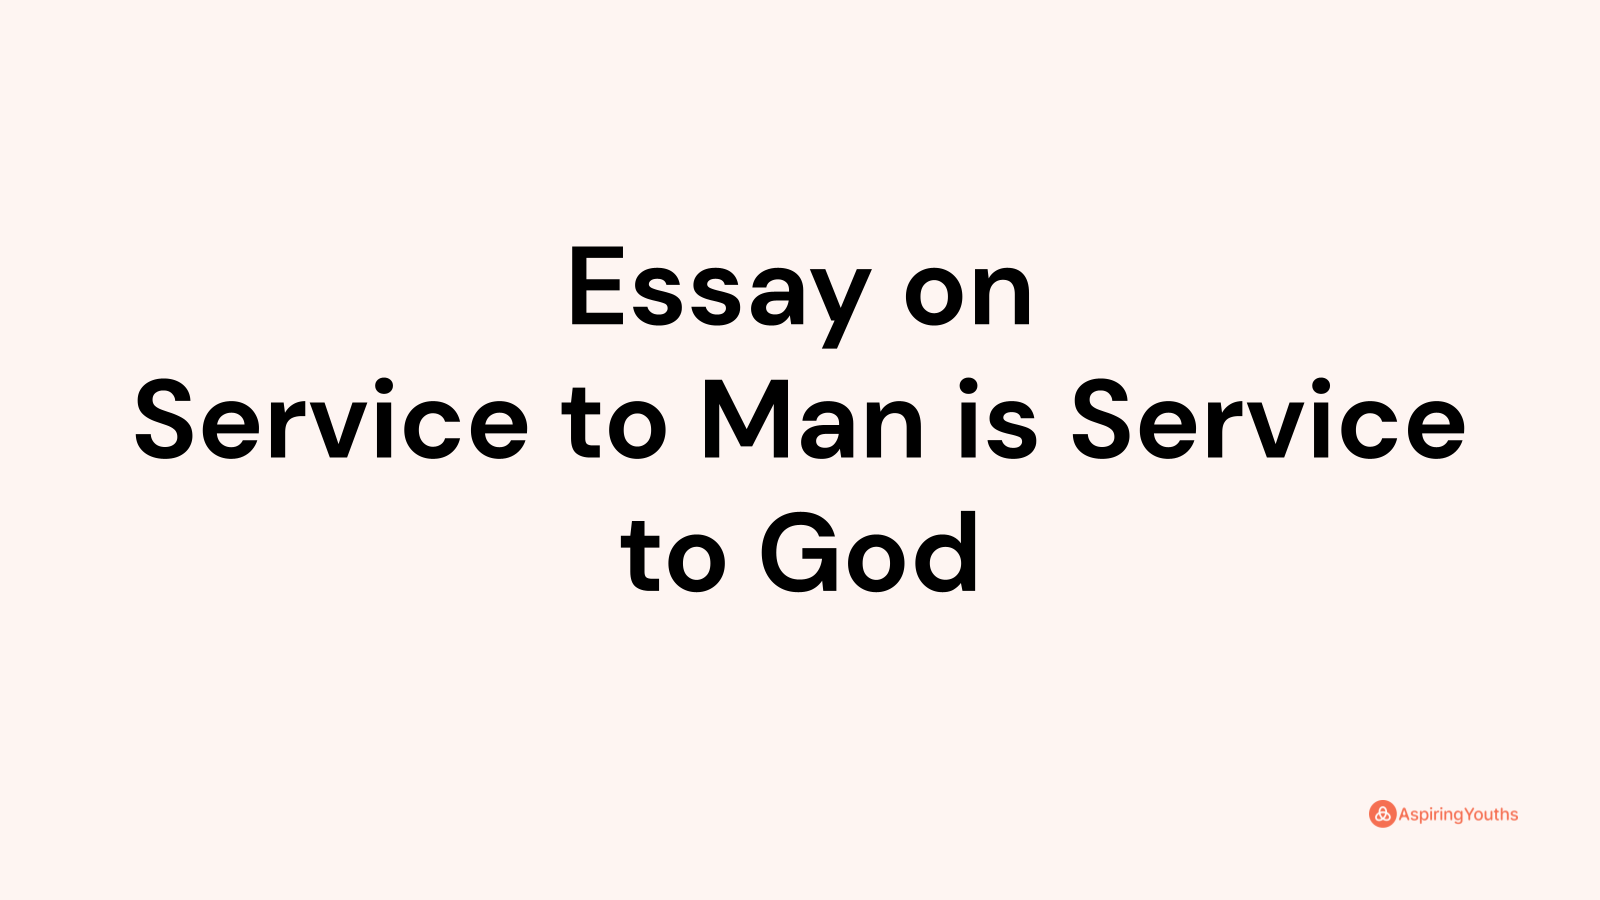 service to man service to god essay in english